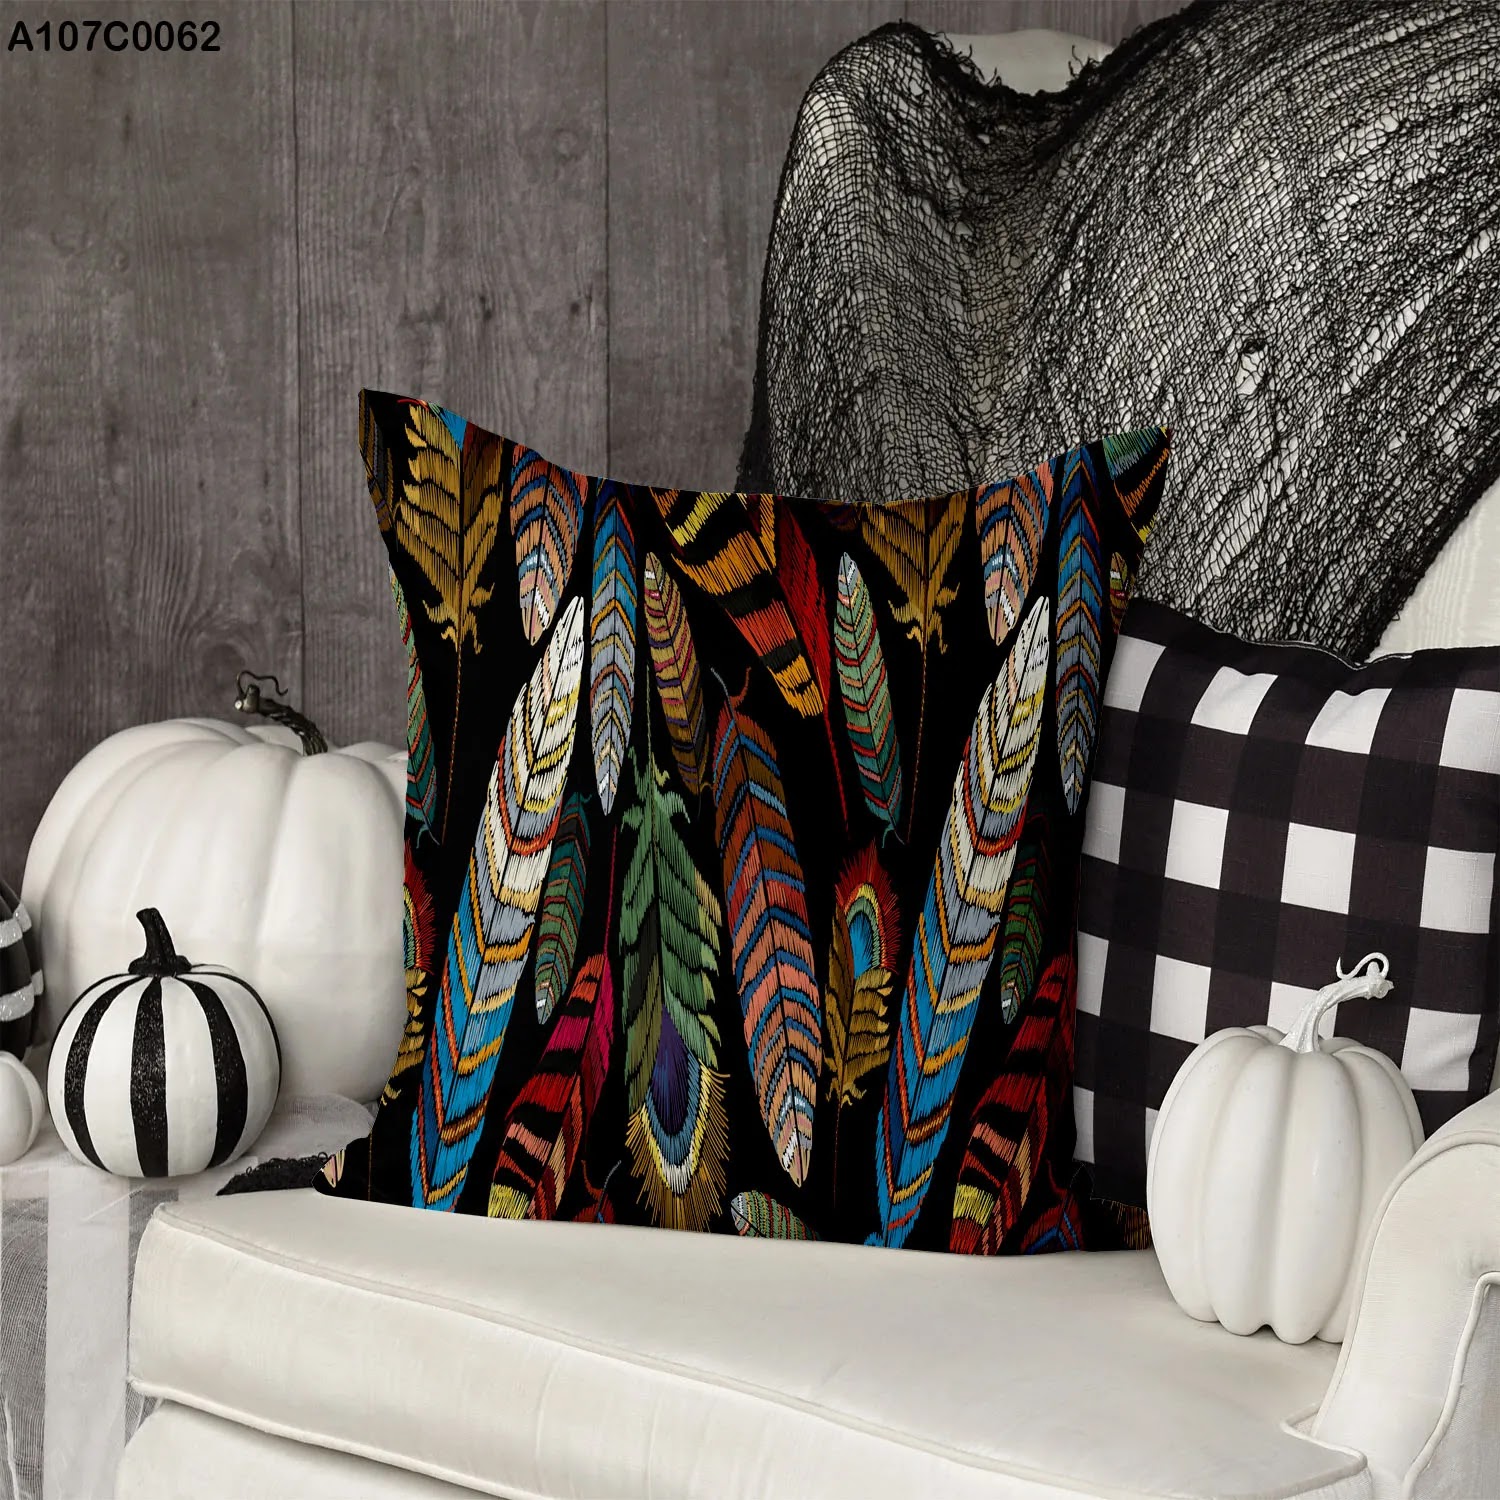 Black pillow case with colored feathers